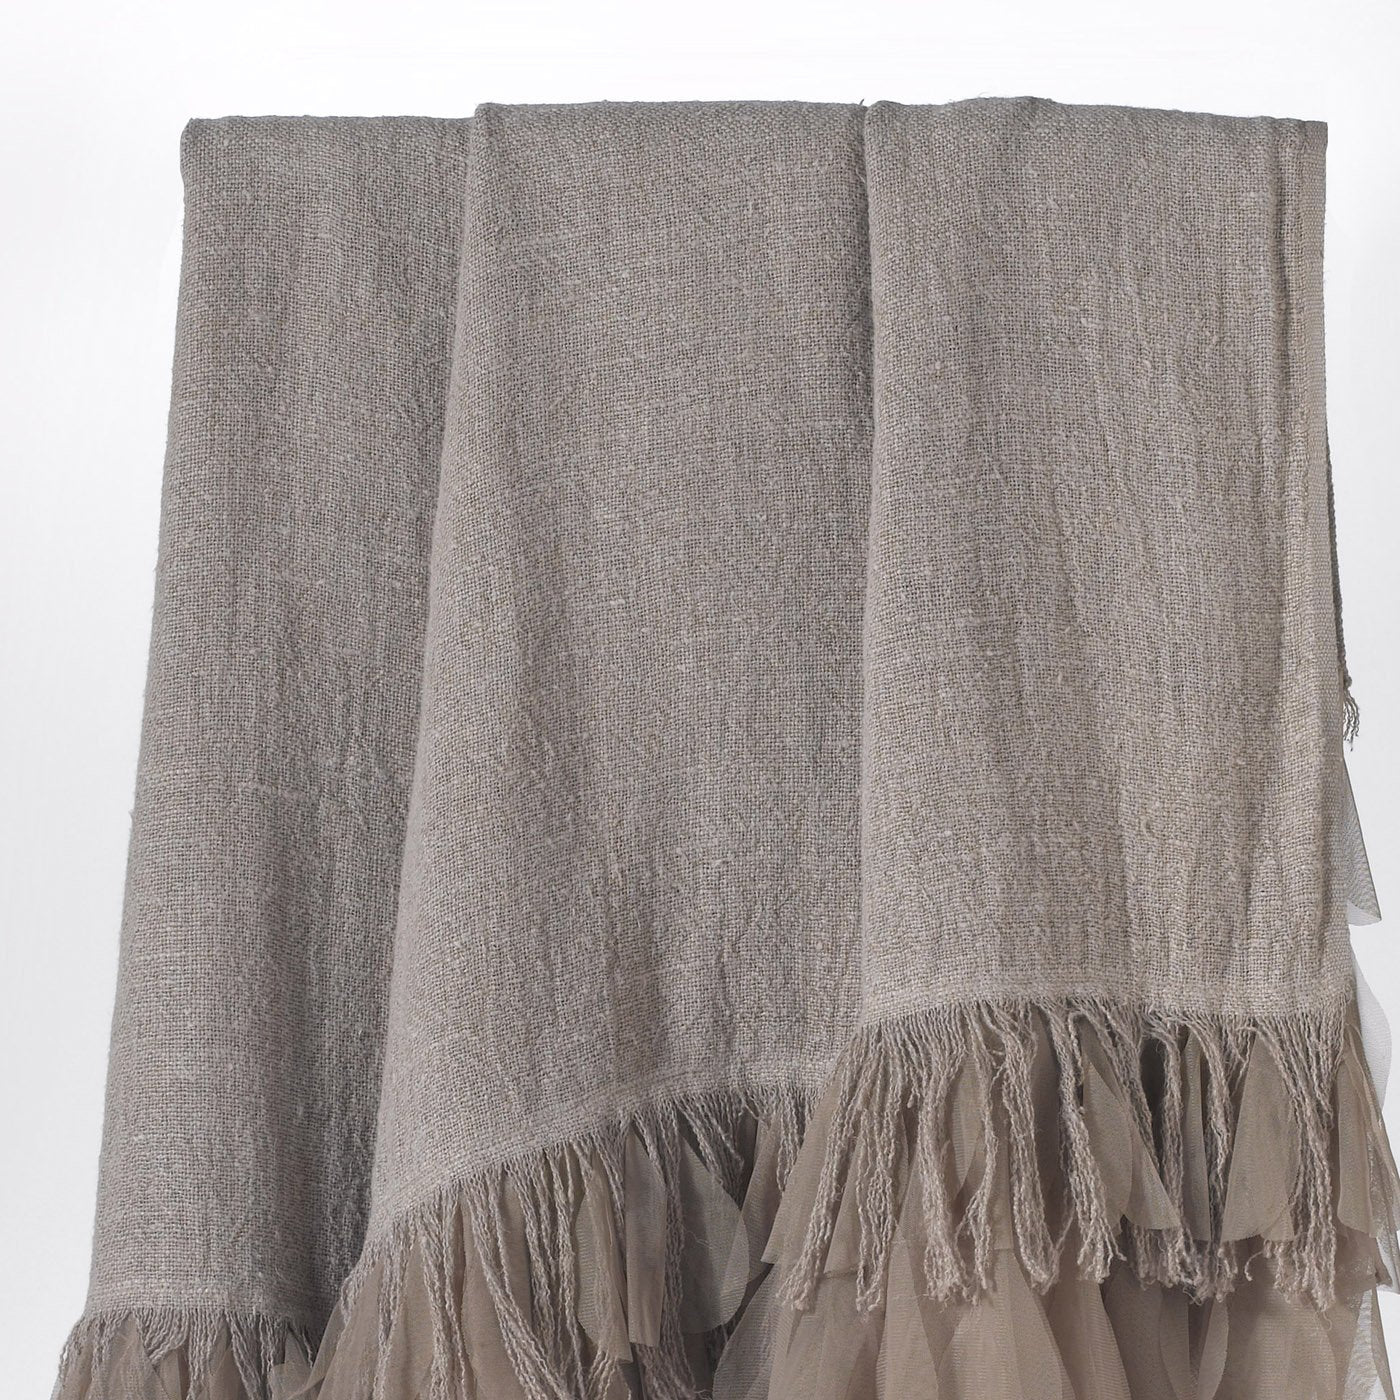 Couture Dreams Chichi Linen Throw Blanket The Bella Cottage The Bella Cottage Inc